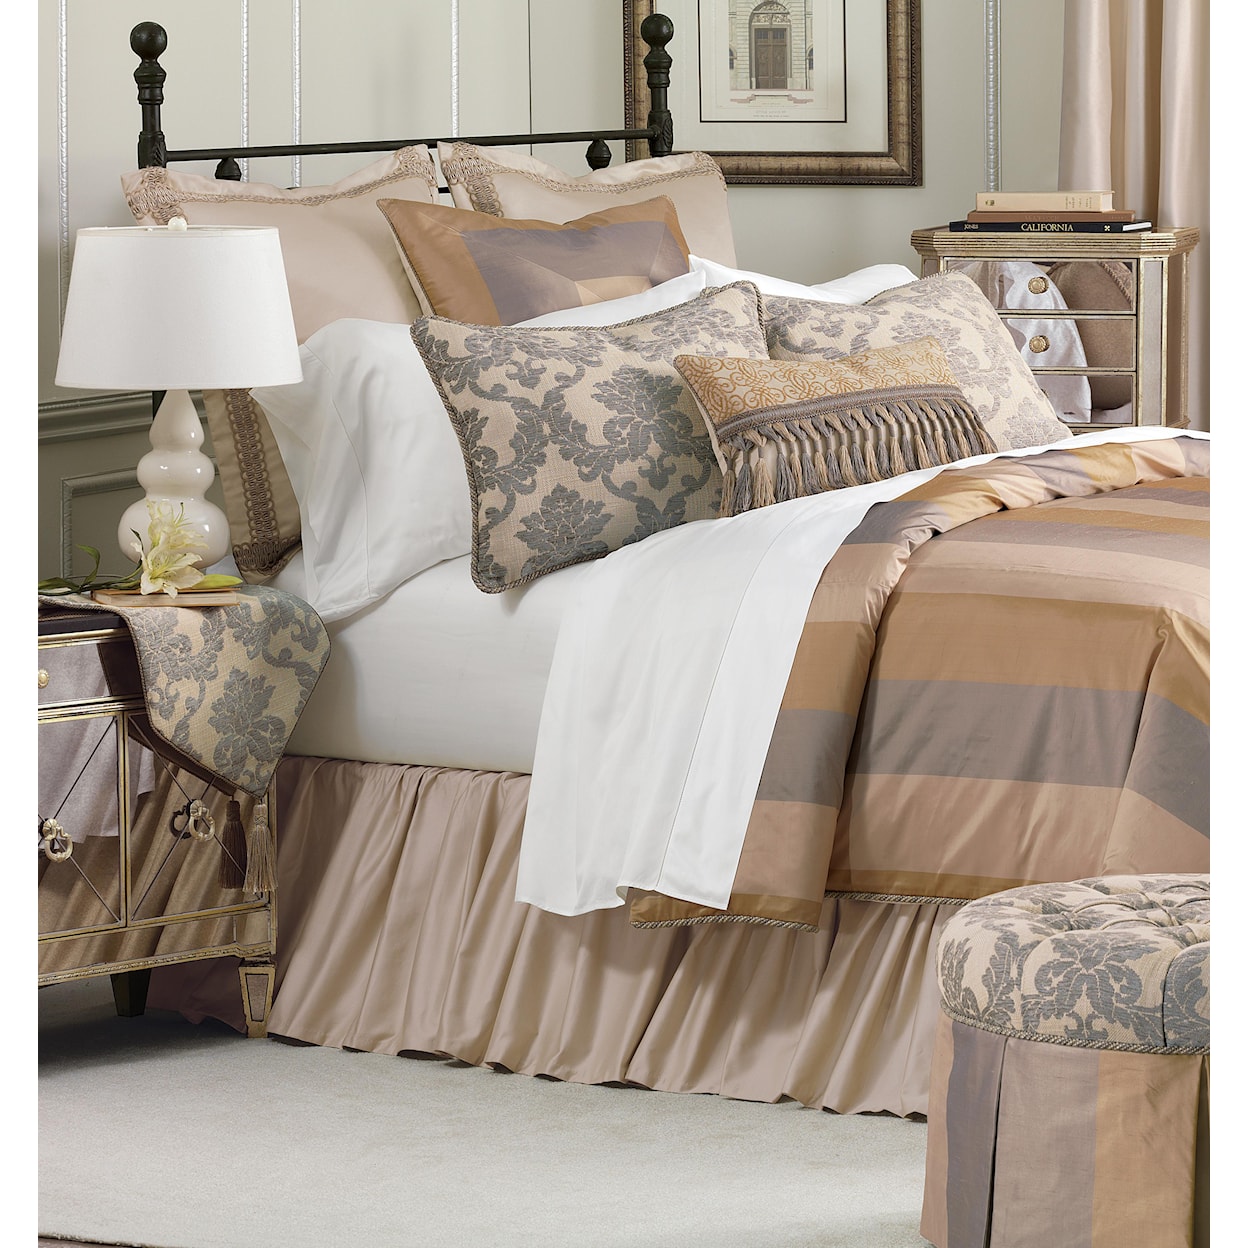 Eastern Accents Lancaster King Bed Skirt